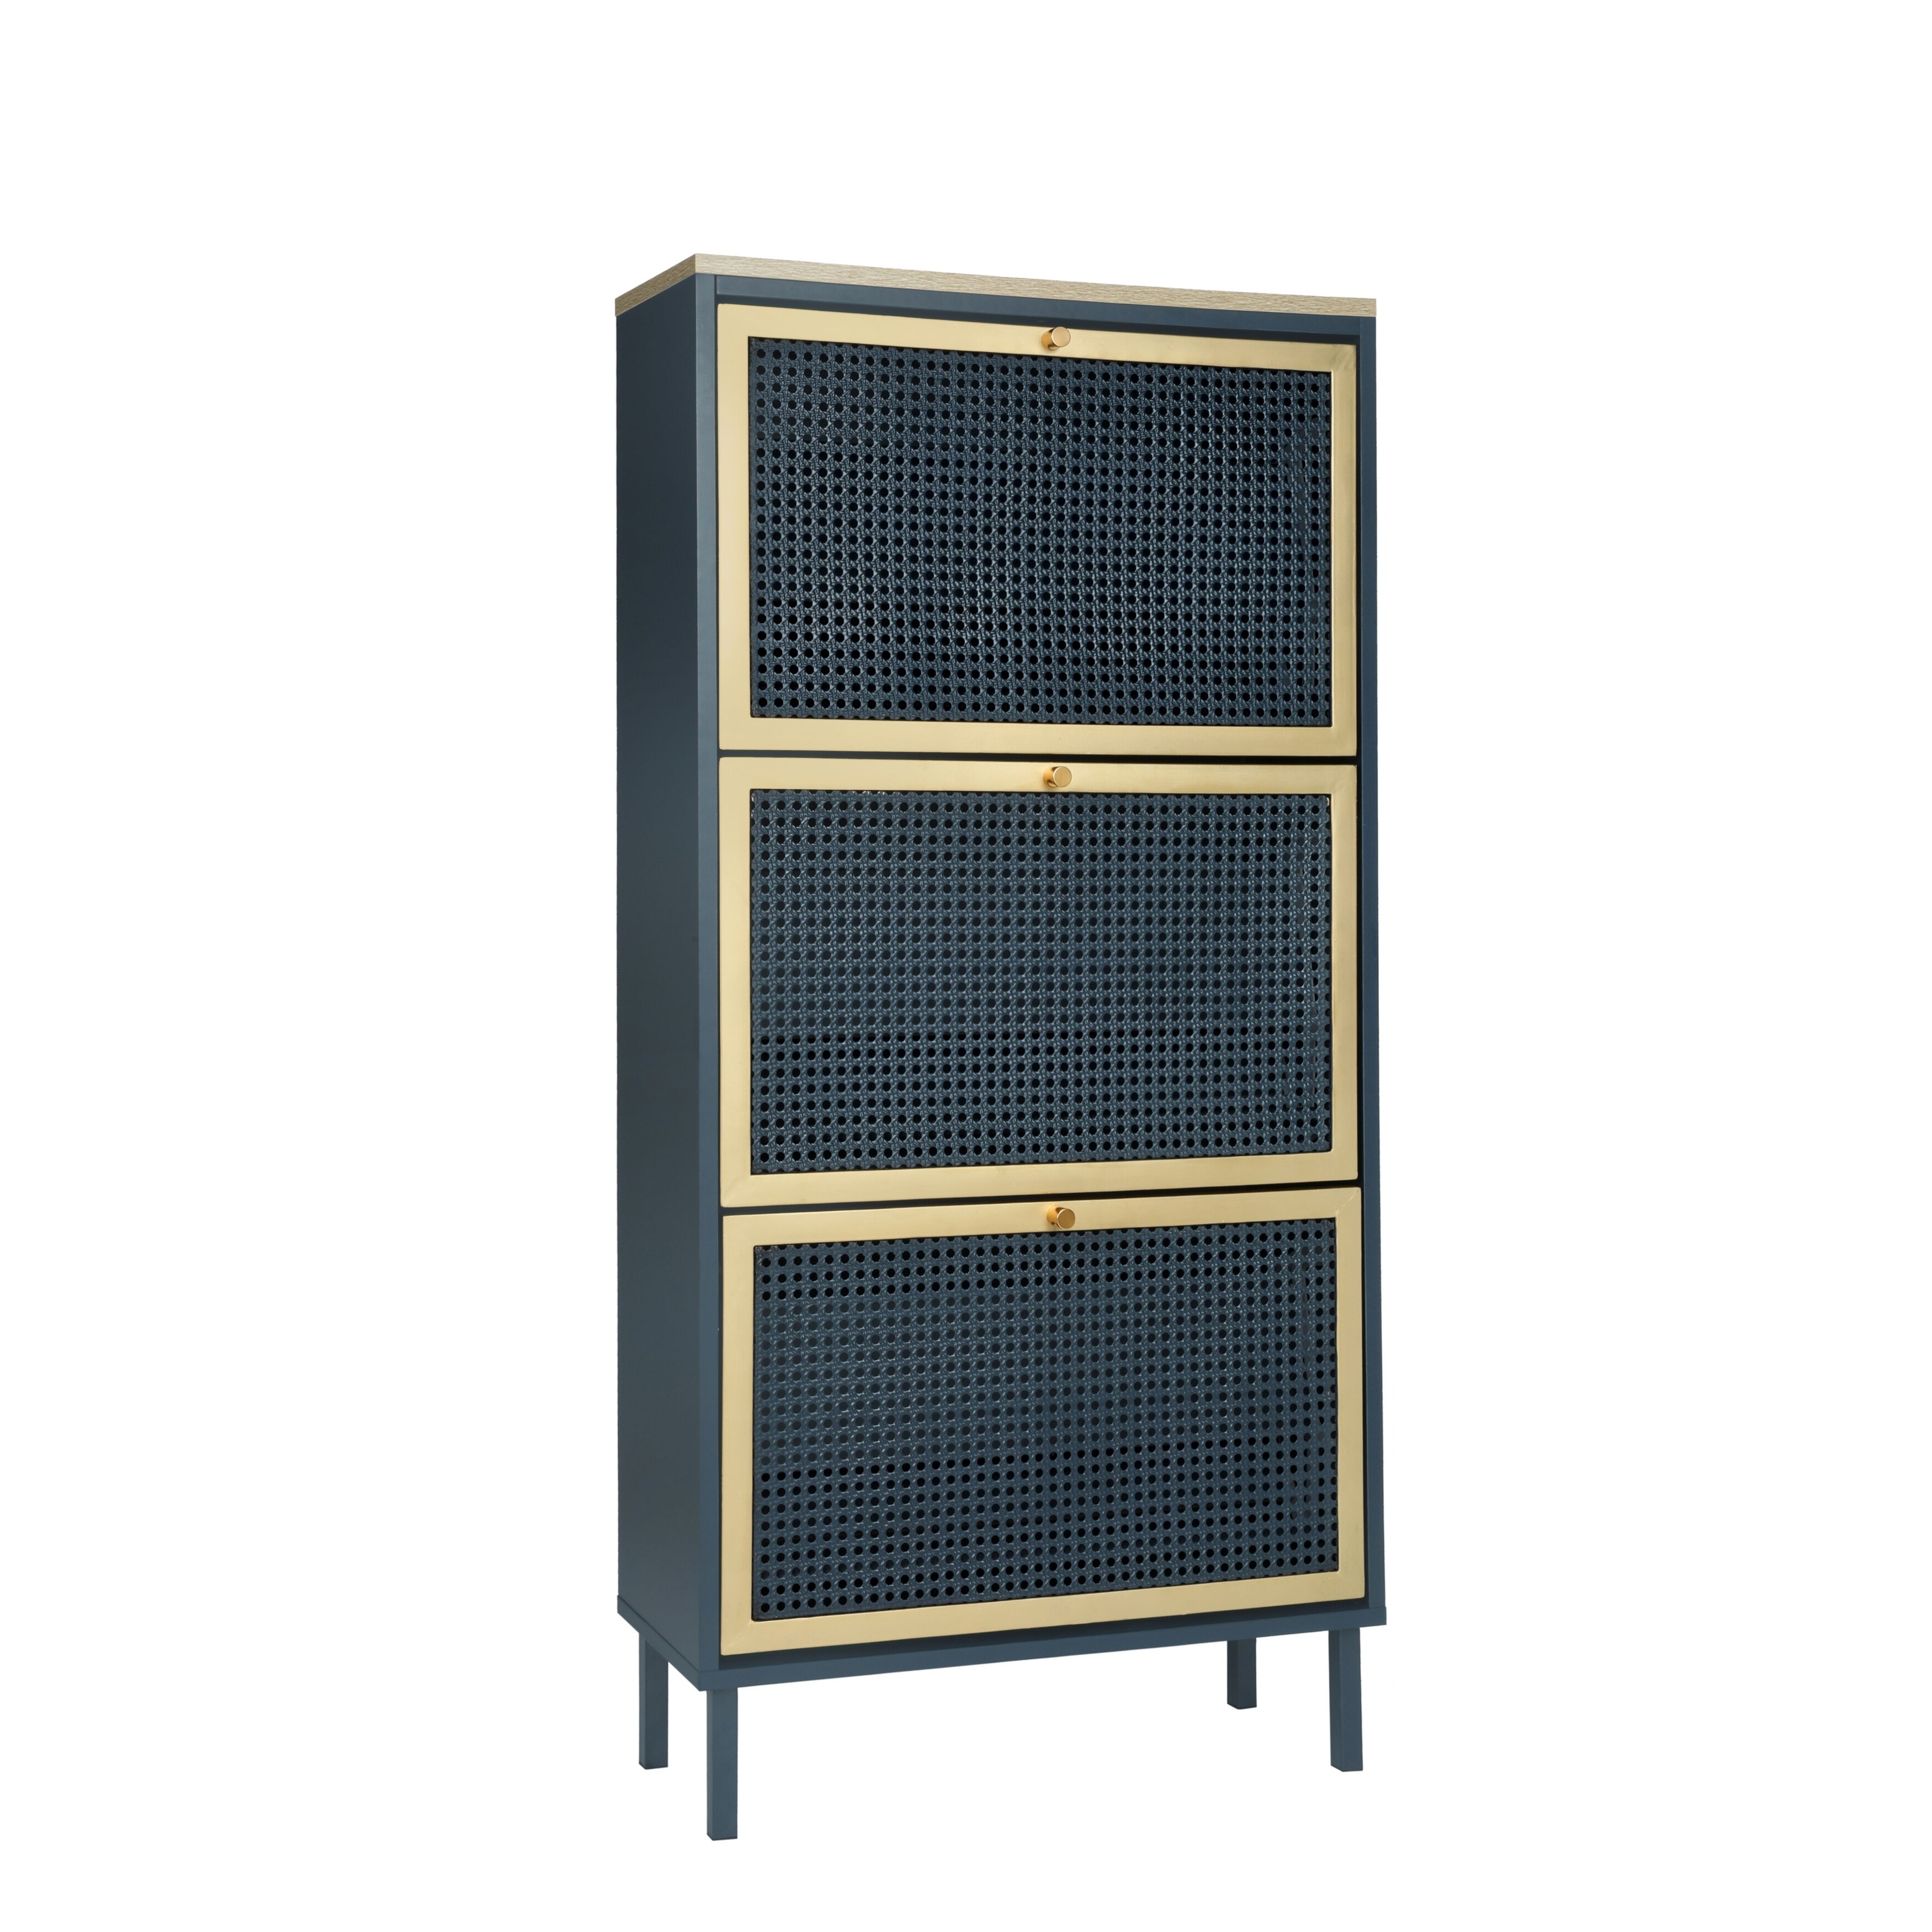 https://ak1.ostkcdn.com/images/products/is/images/direct/1c5b7c142dab34b61873c60d8c6bb4810d102827/3-Metal-Door-Shoe-Rack%2C-Freestanding-Modern-Shoe-Storage-Cabinet.jpg